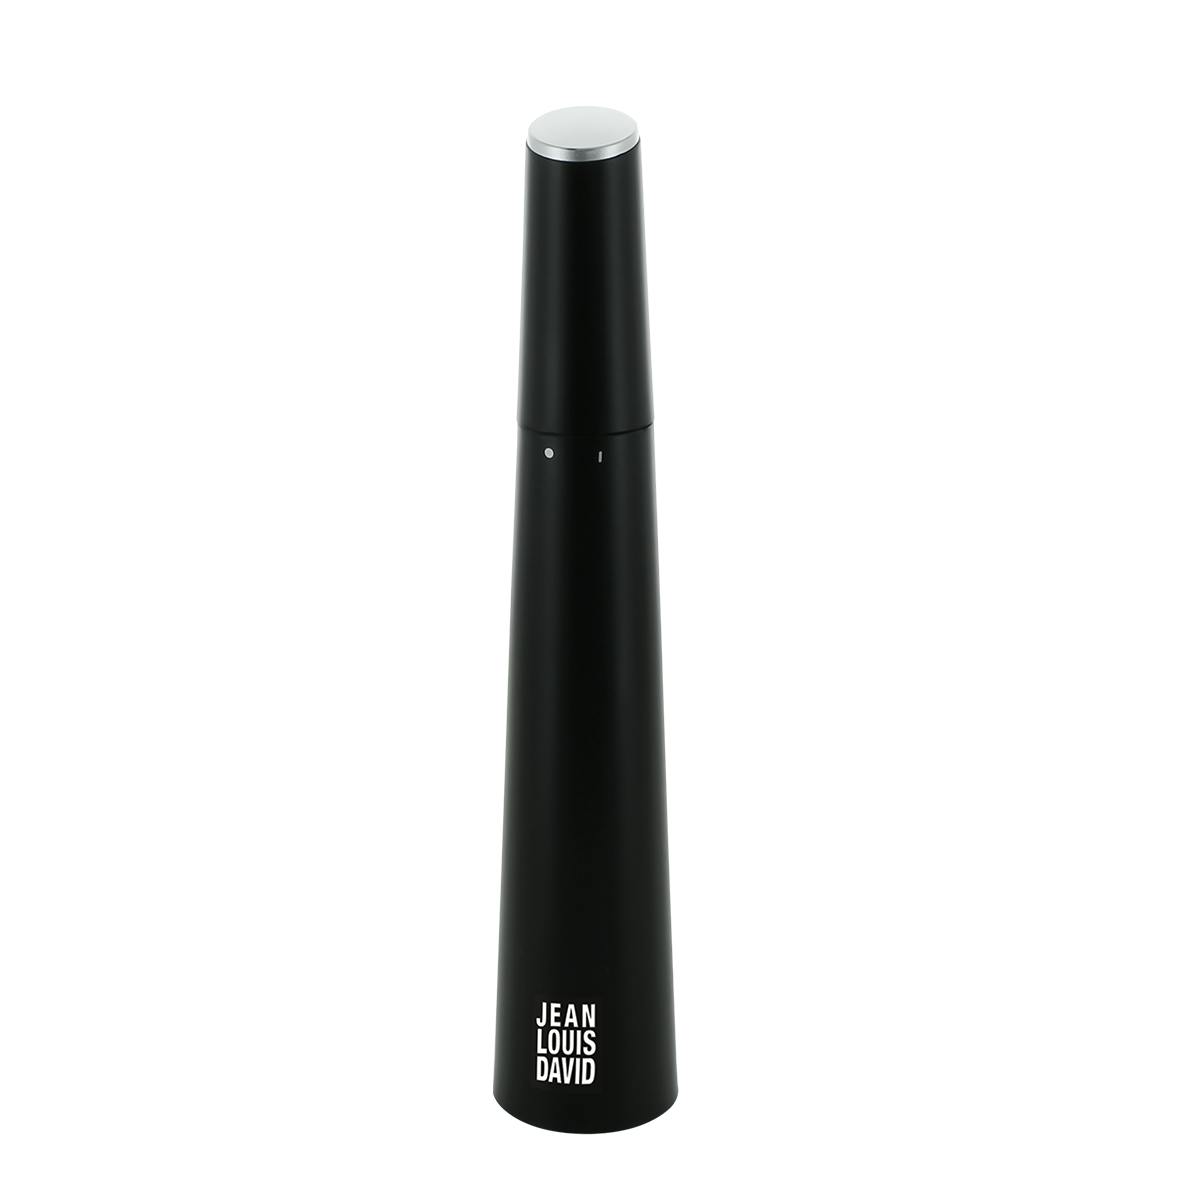 JLD - NOSE & EARS TRIMMER